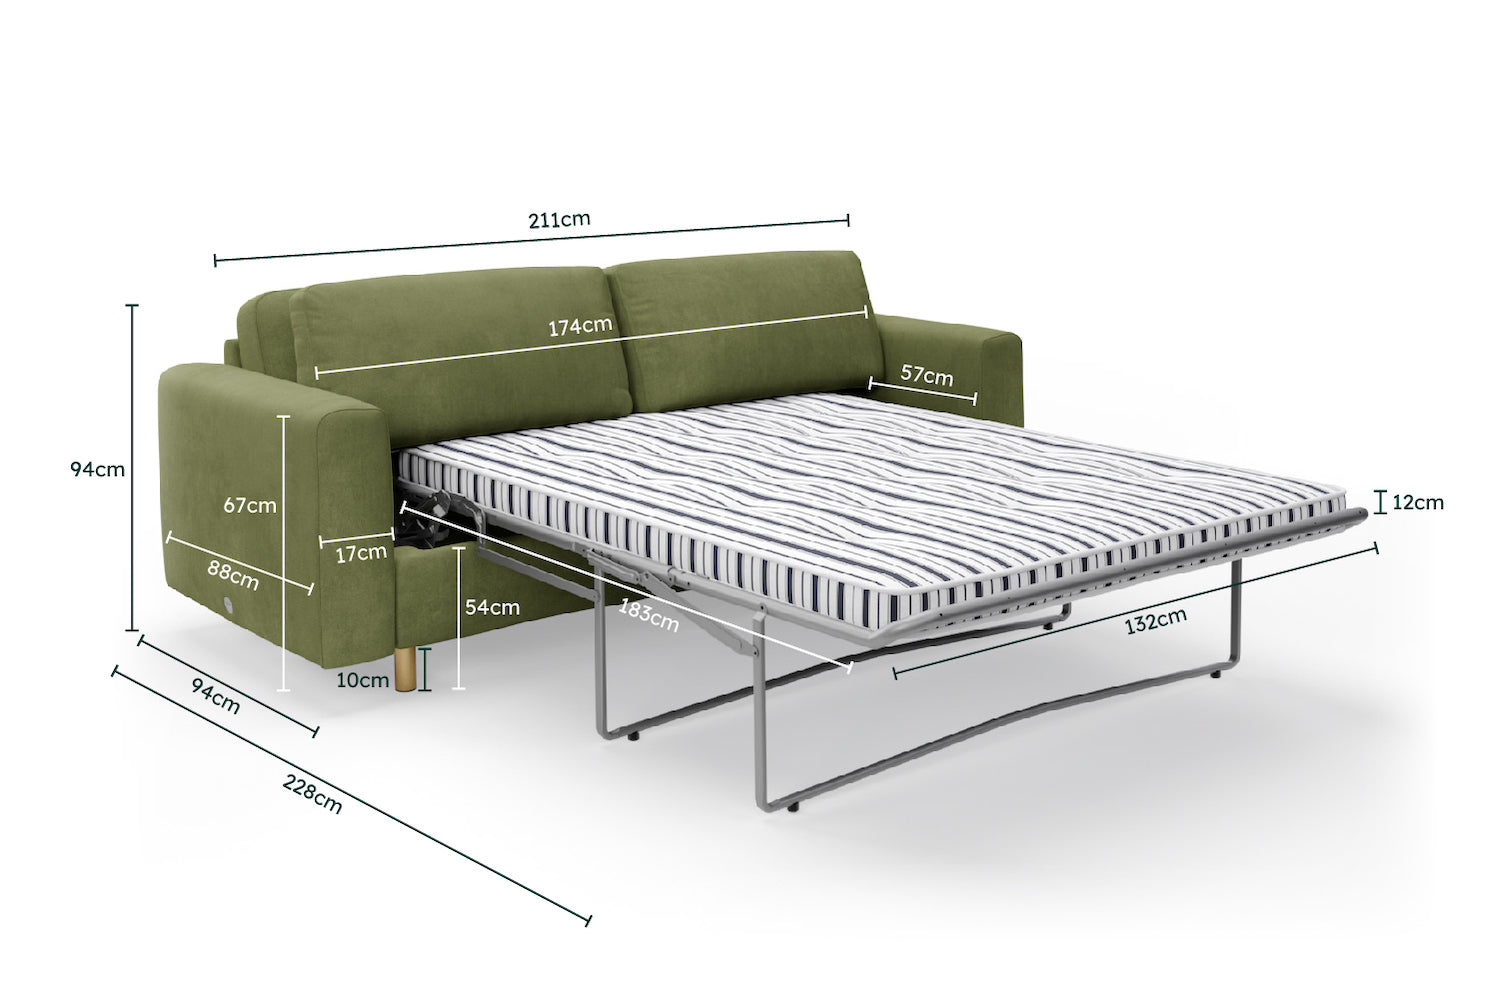 The Big Chill 3 Seater Sofa Bed